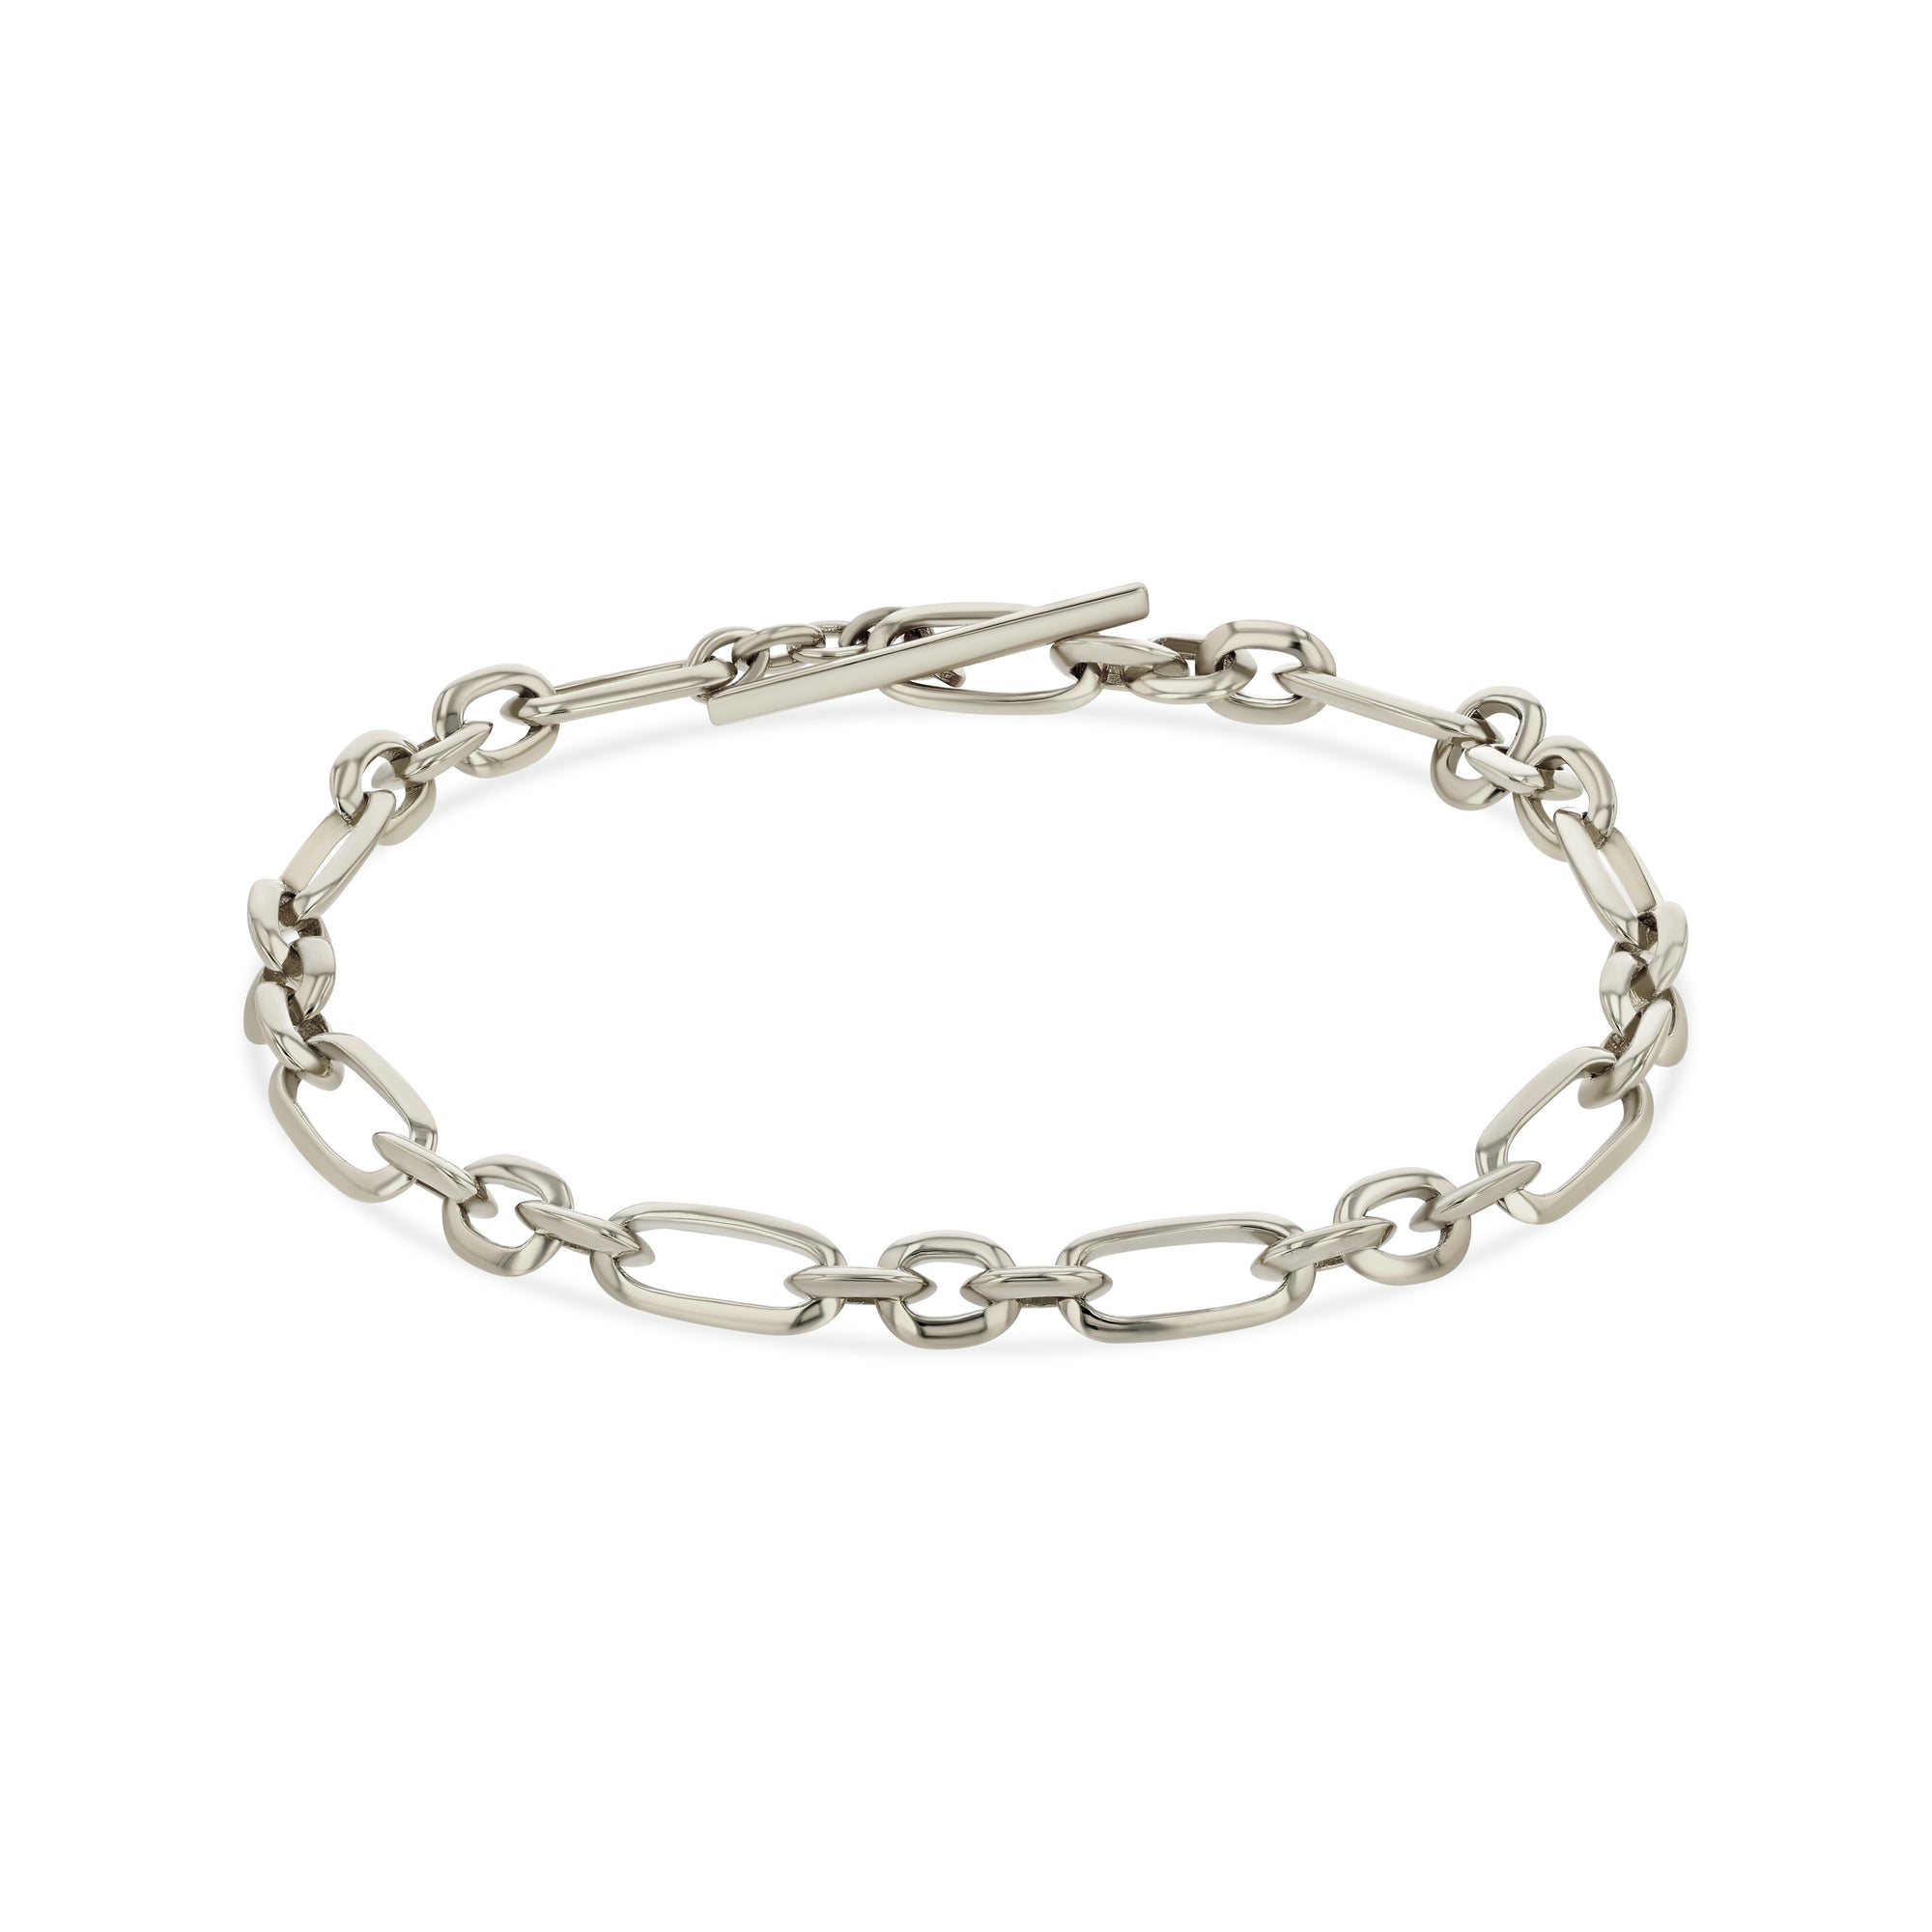 12mm WHITE gold Iced CLASP Cuban Bracelet – SpicyIce